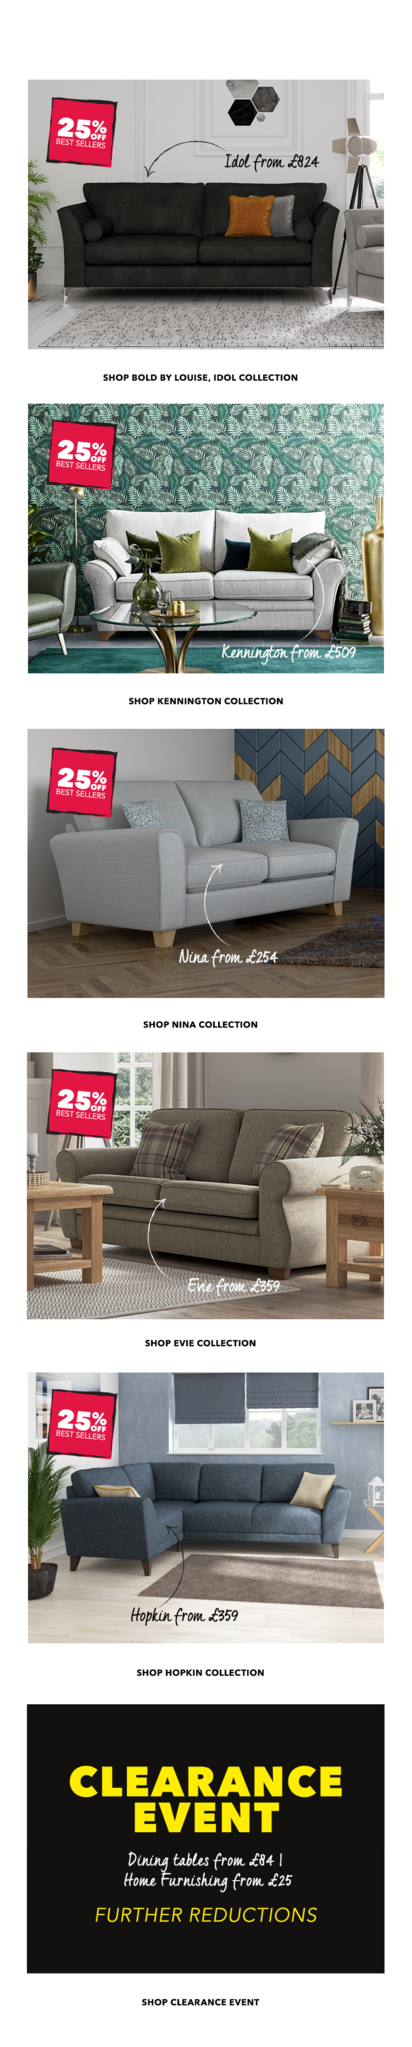 Harveys Furniture Shop Sofas Dining Home Accessories More